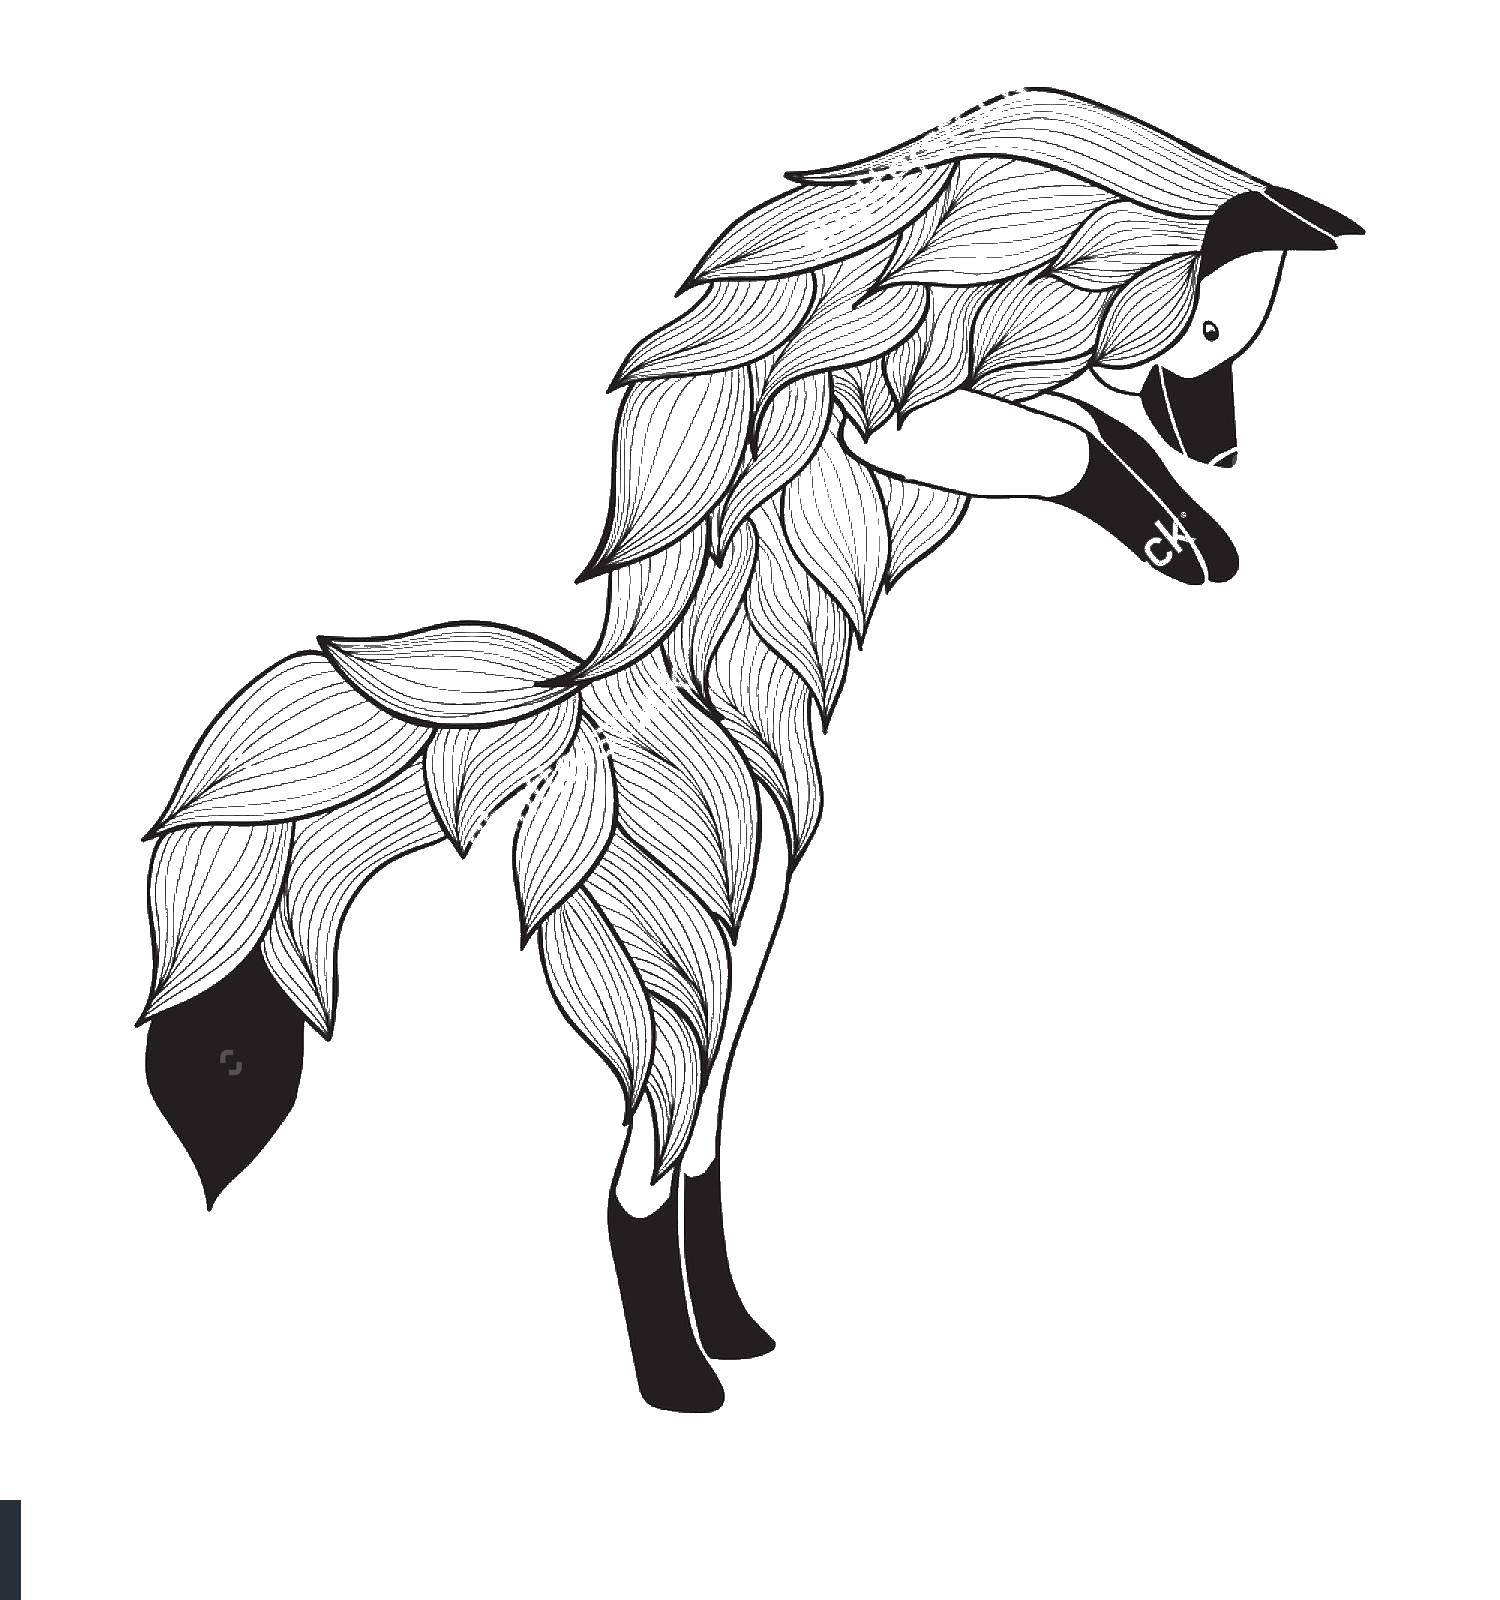 Coloring Fox patterns and lines. Category Fox. Tags:  Fox.